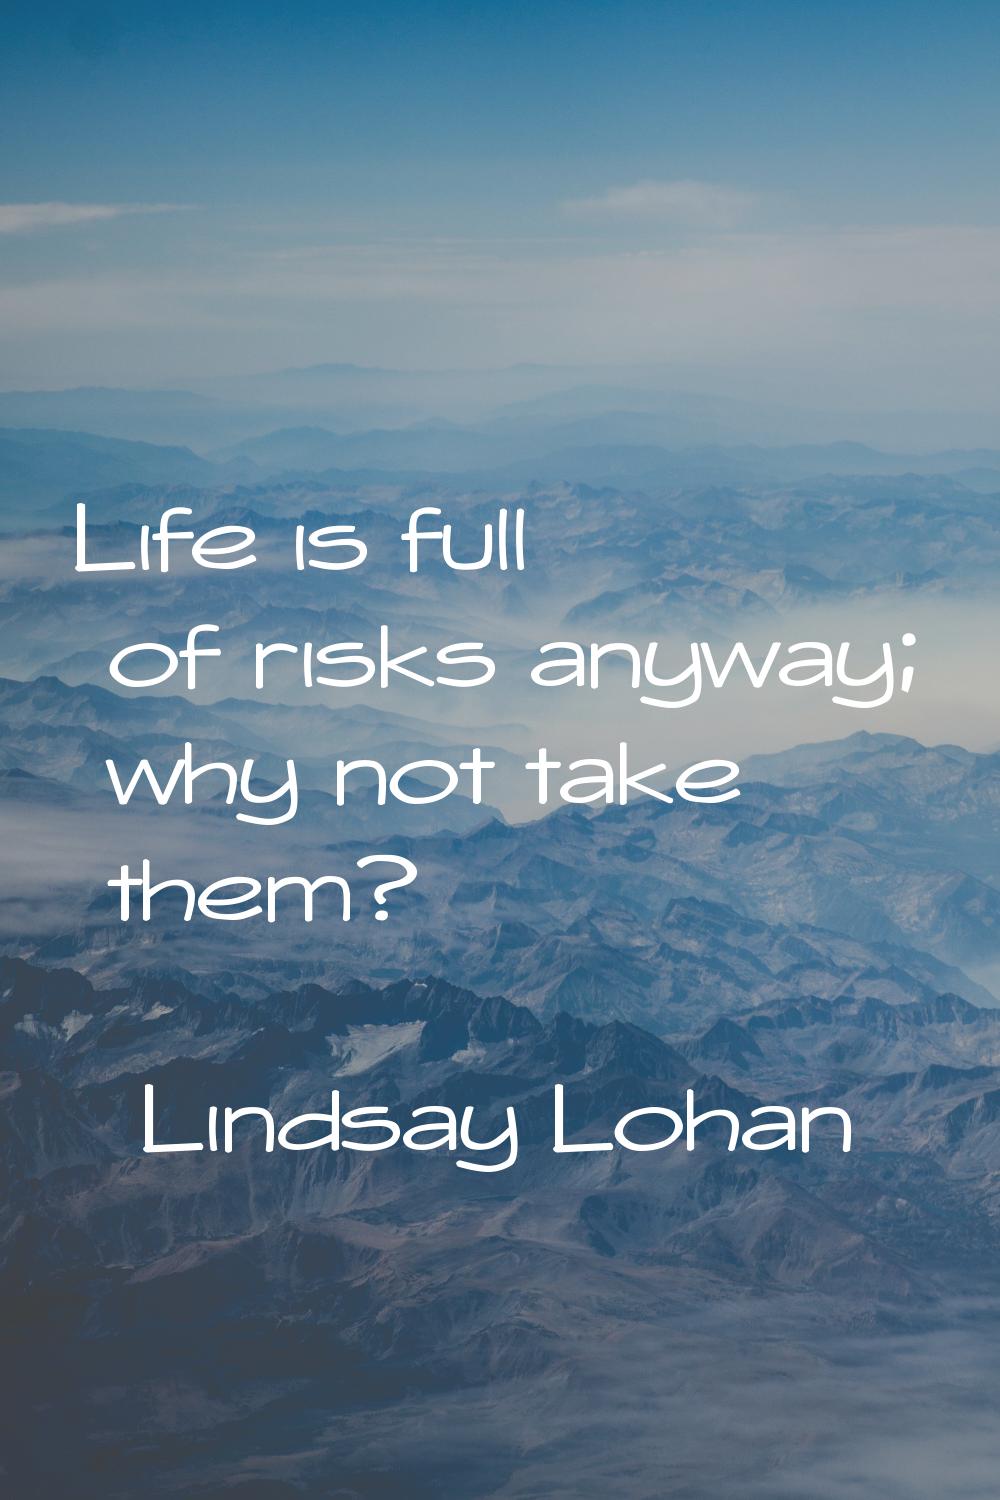 Life is full of risks anyway; why not take them?